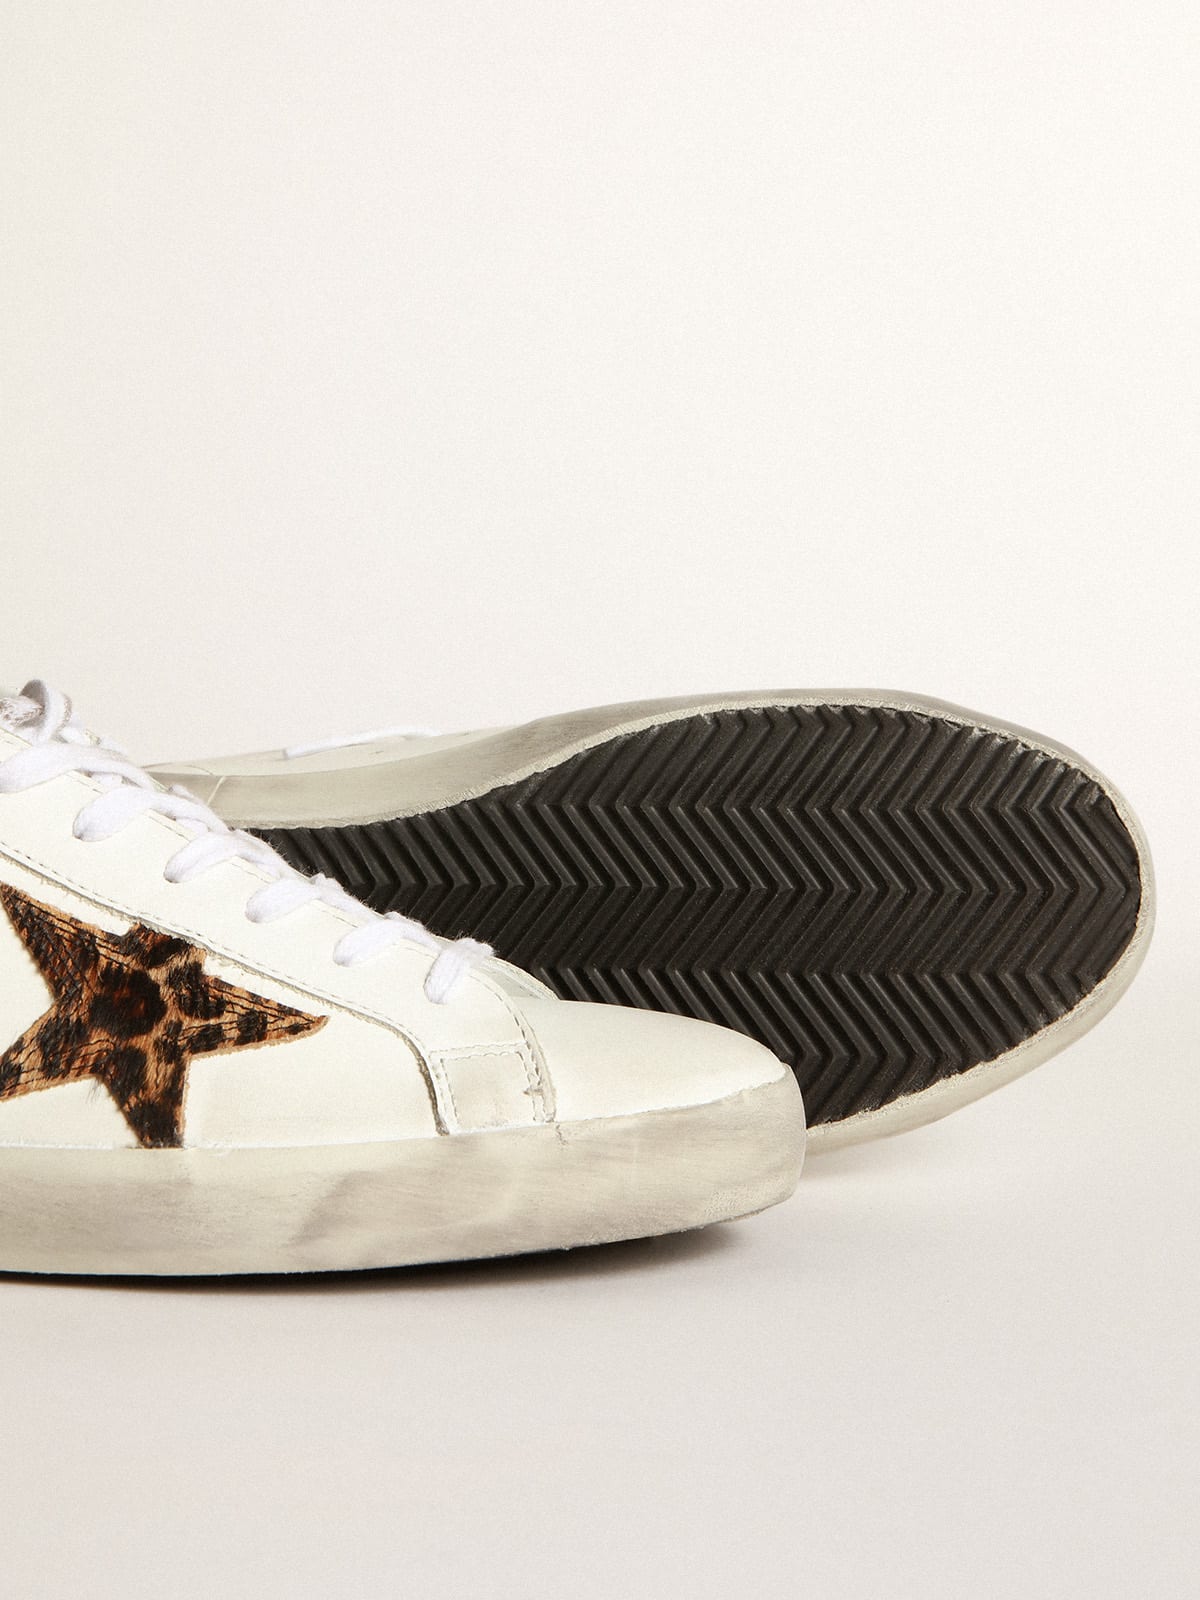 Golden Goose - Super-Star sneakers with leopard-print star and blue heel tab     in 